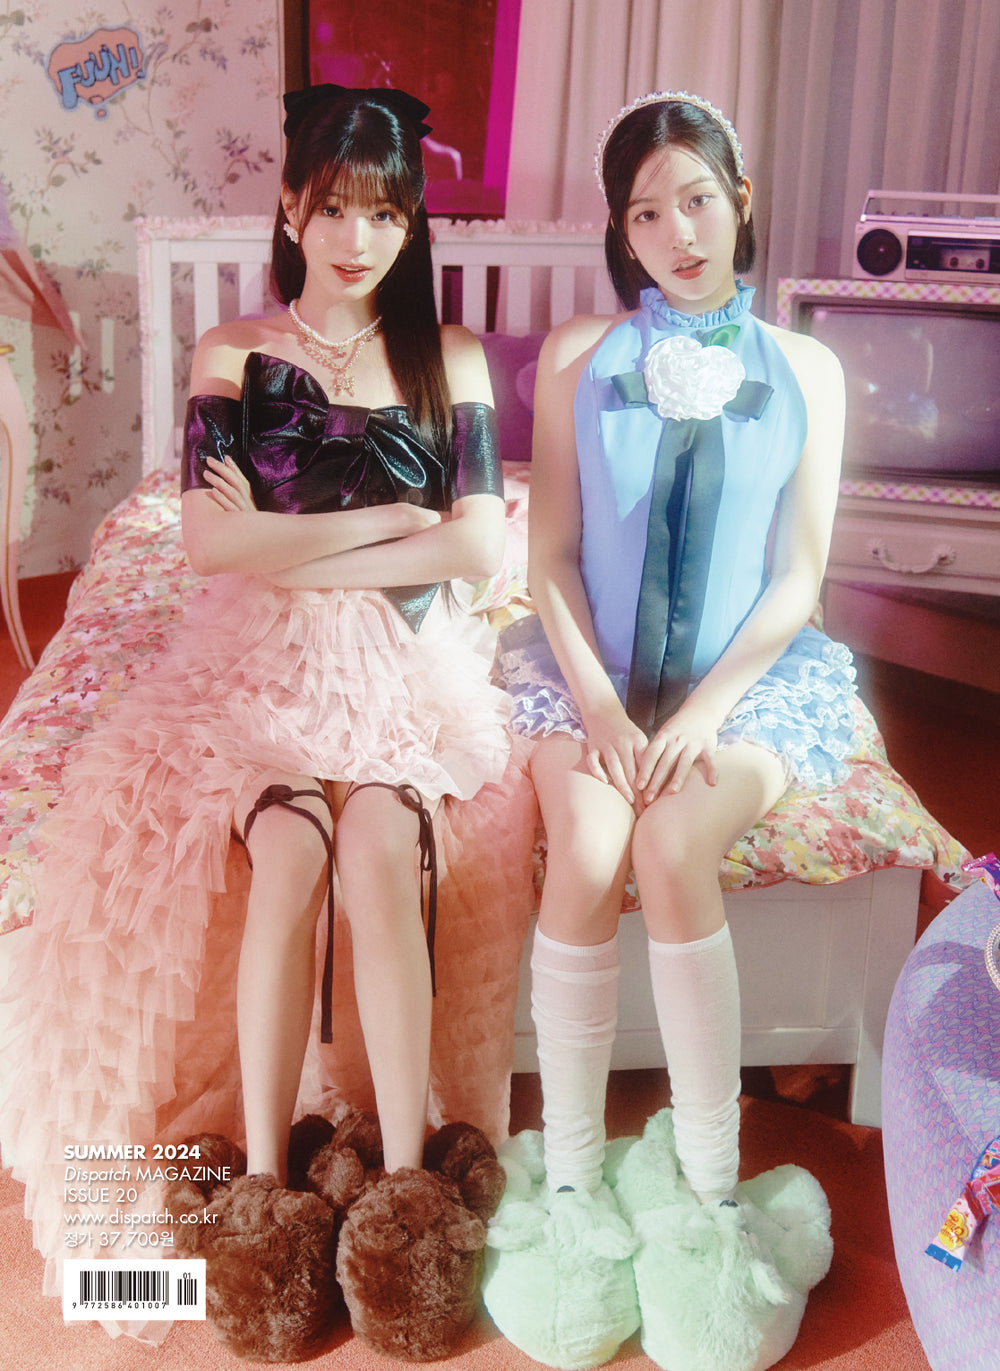 [Pre-Order] DICON VOLUME N°20 IVE : I haVE a dream, I haVE a fantasy / (B type) 01 AN YUJIN